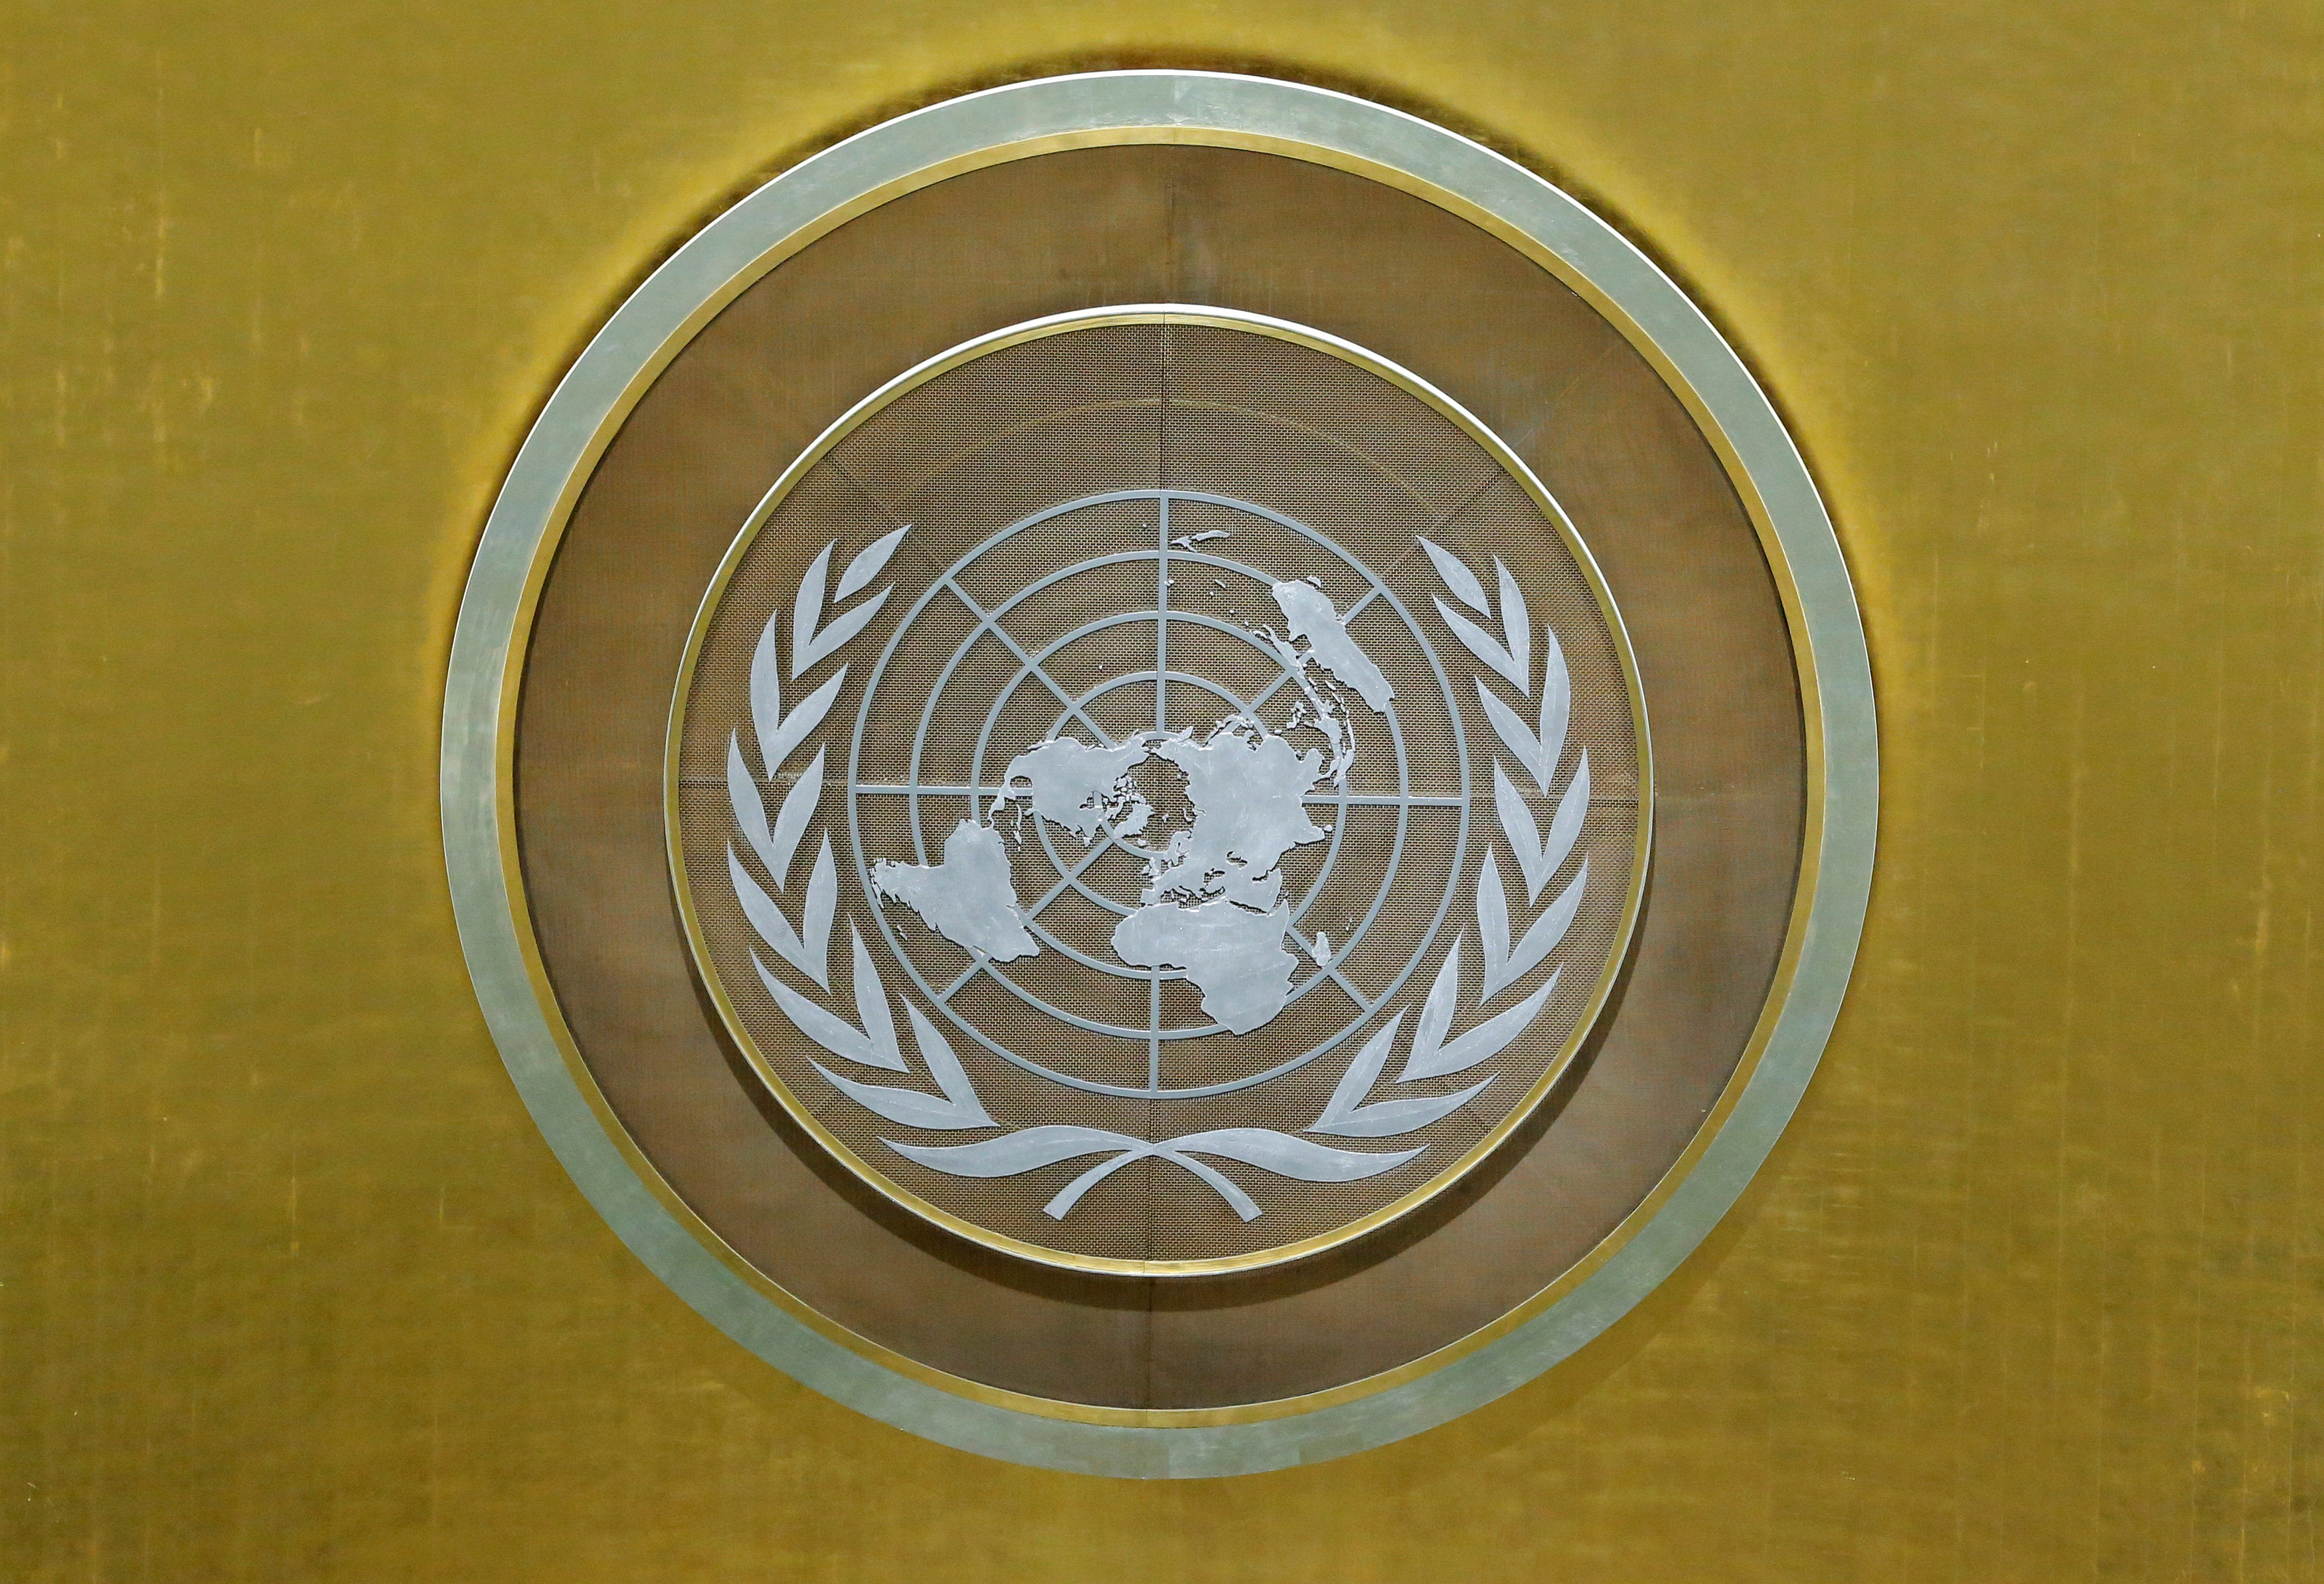 United Nations. Credit: Reuters File Photo